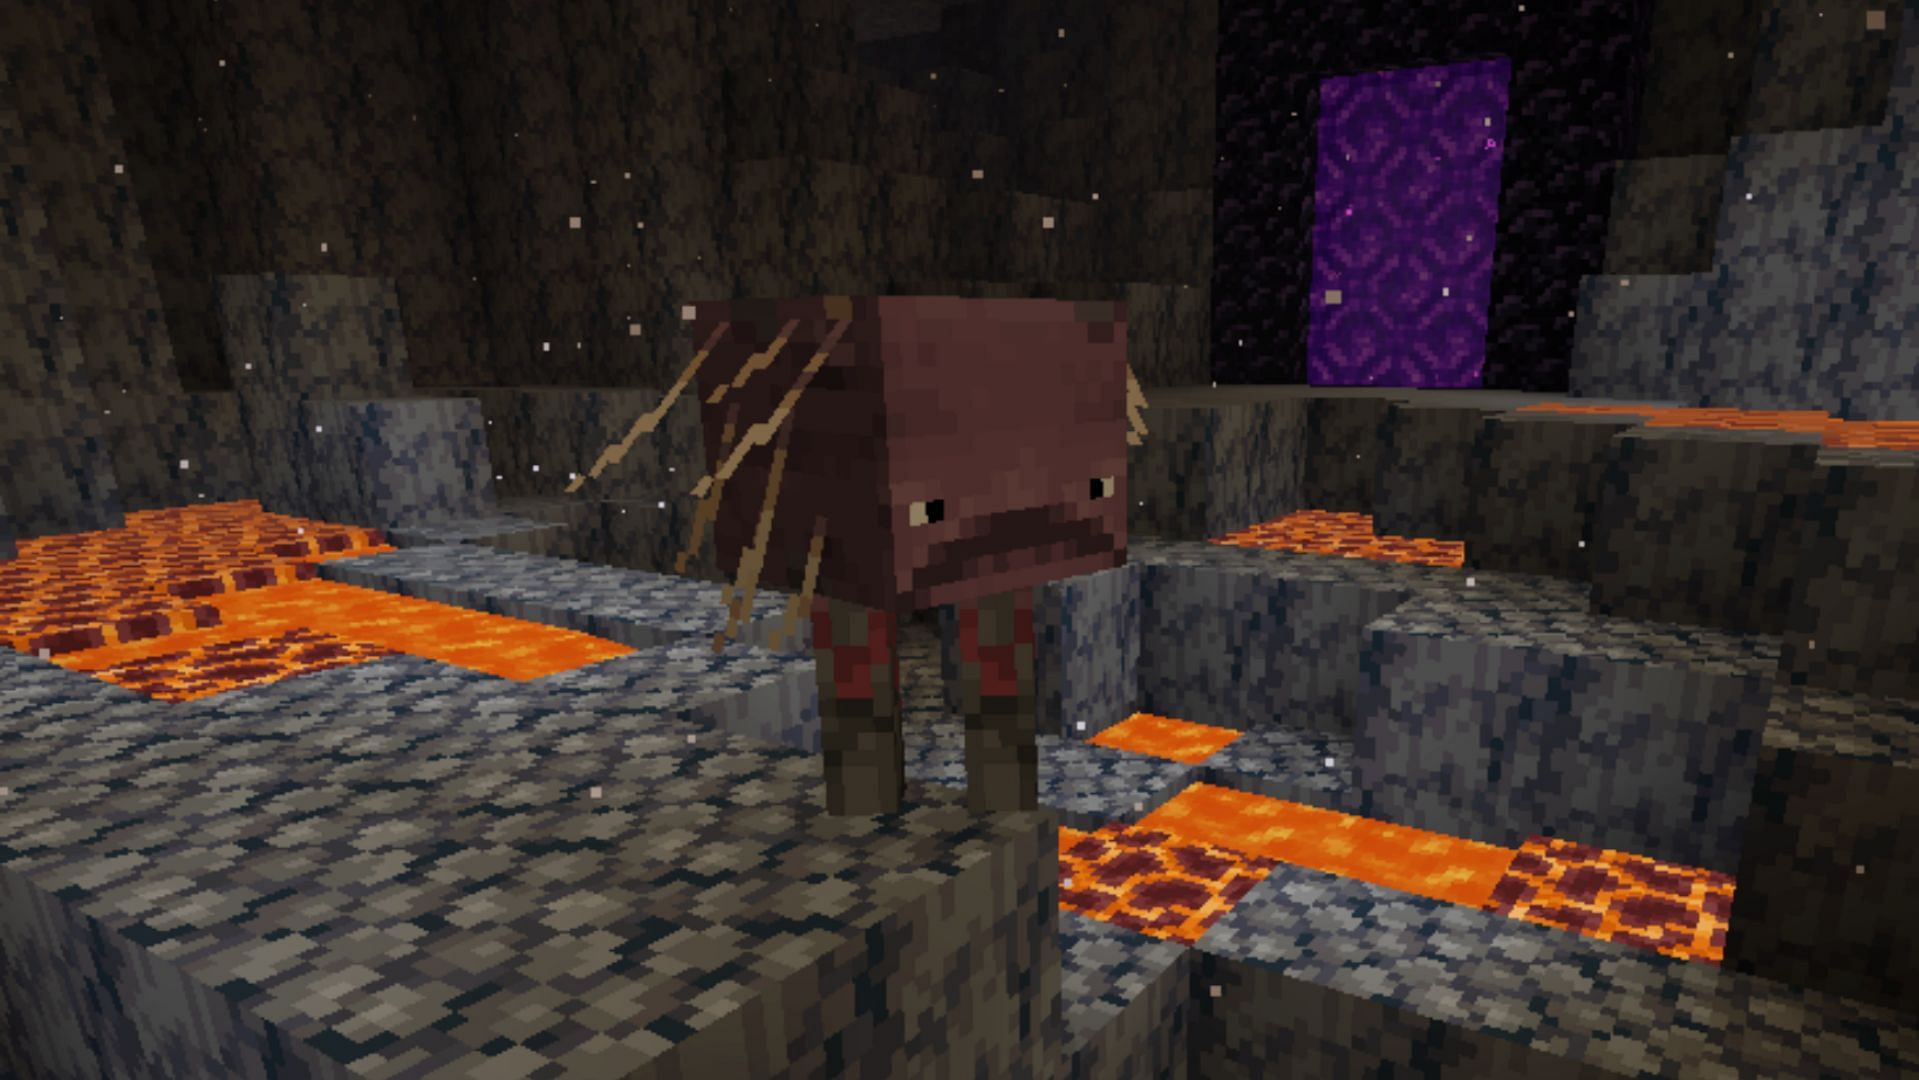 Players rarely use striders to cross lava pools in the Nether realm (Image via Mojang Studios)